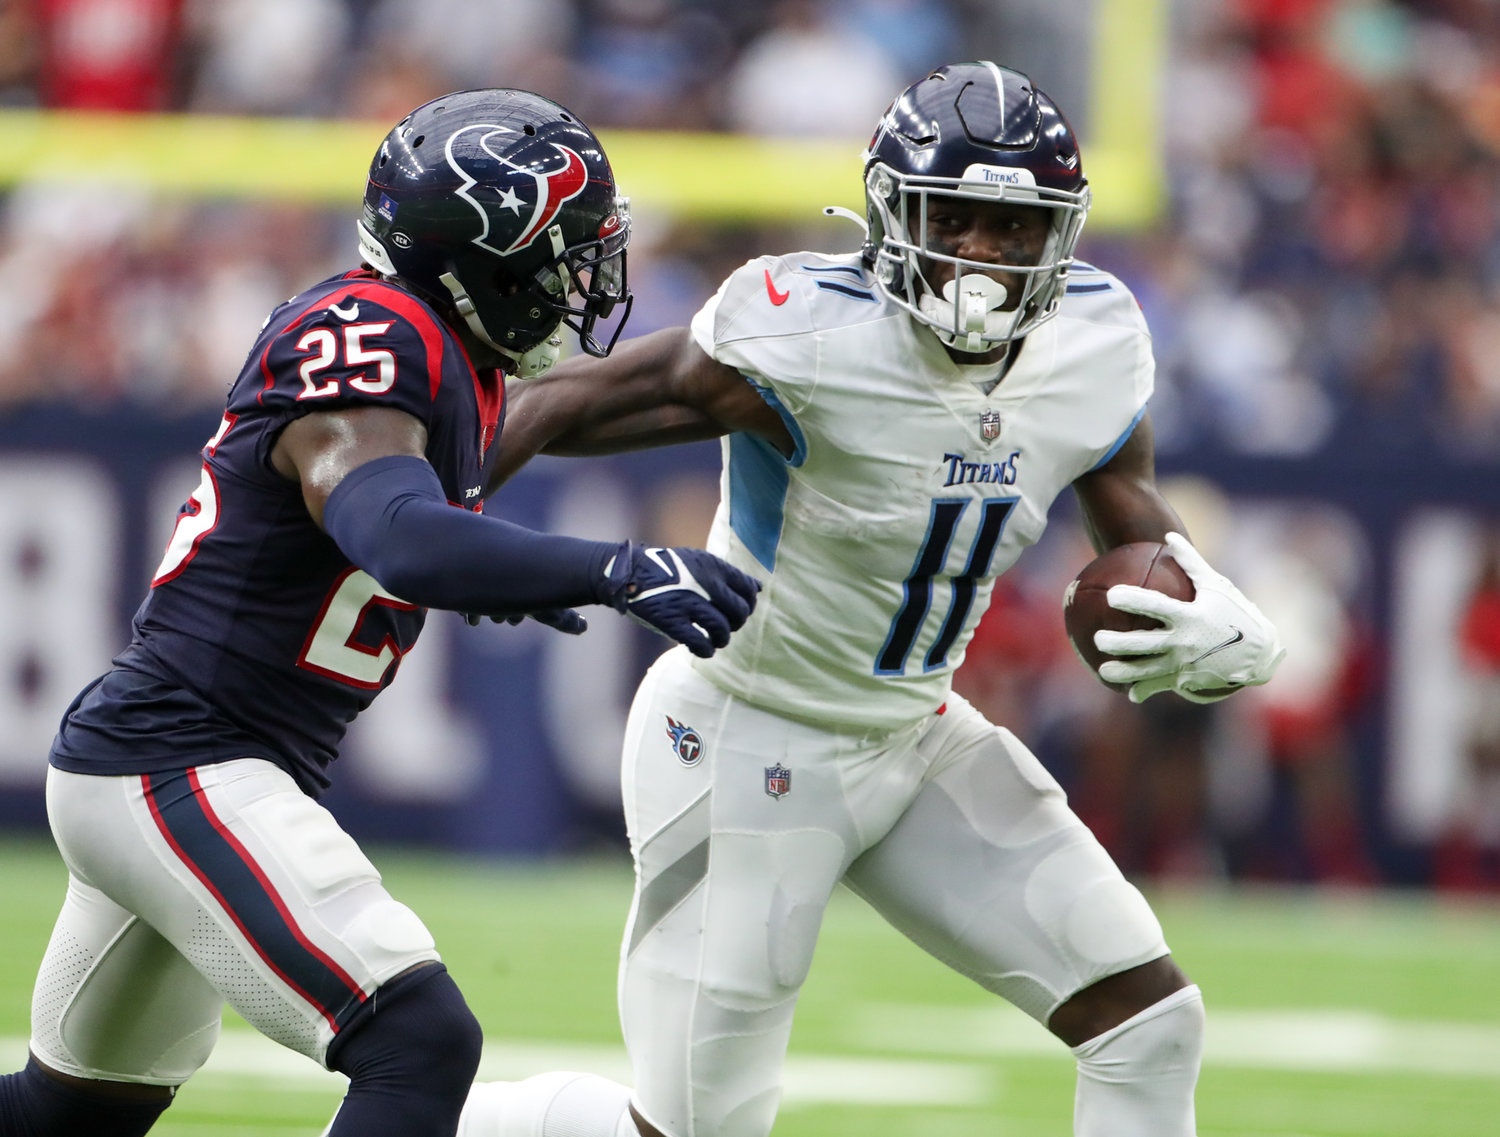 Tennessee Titans wide receiver A.J. Brown (11) carries the ball after a catch during an NFL game between the Texans and the Titans on Jan. 9, 2022 in Houston, Texas.